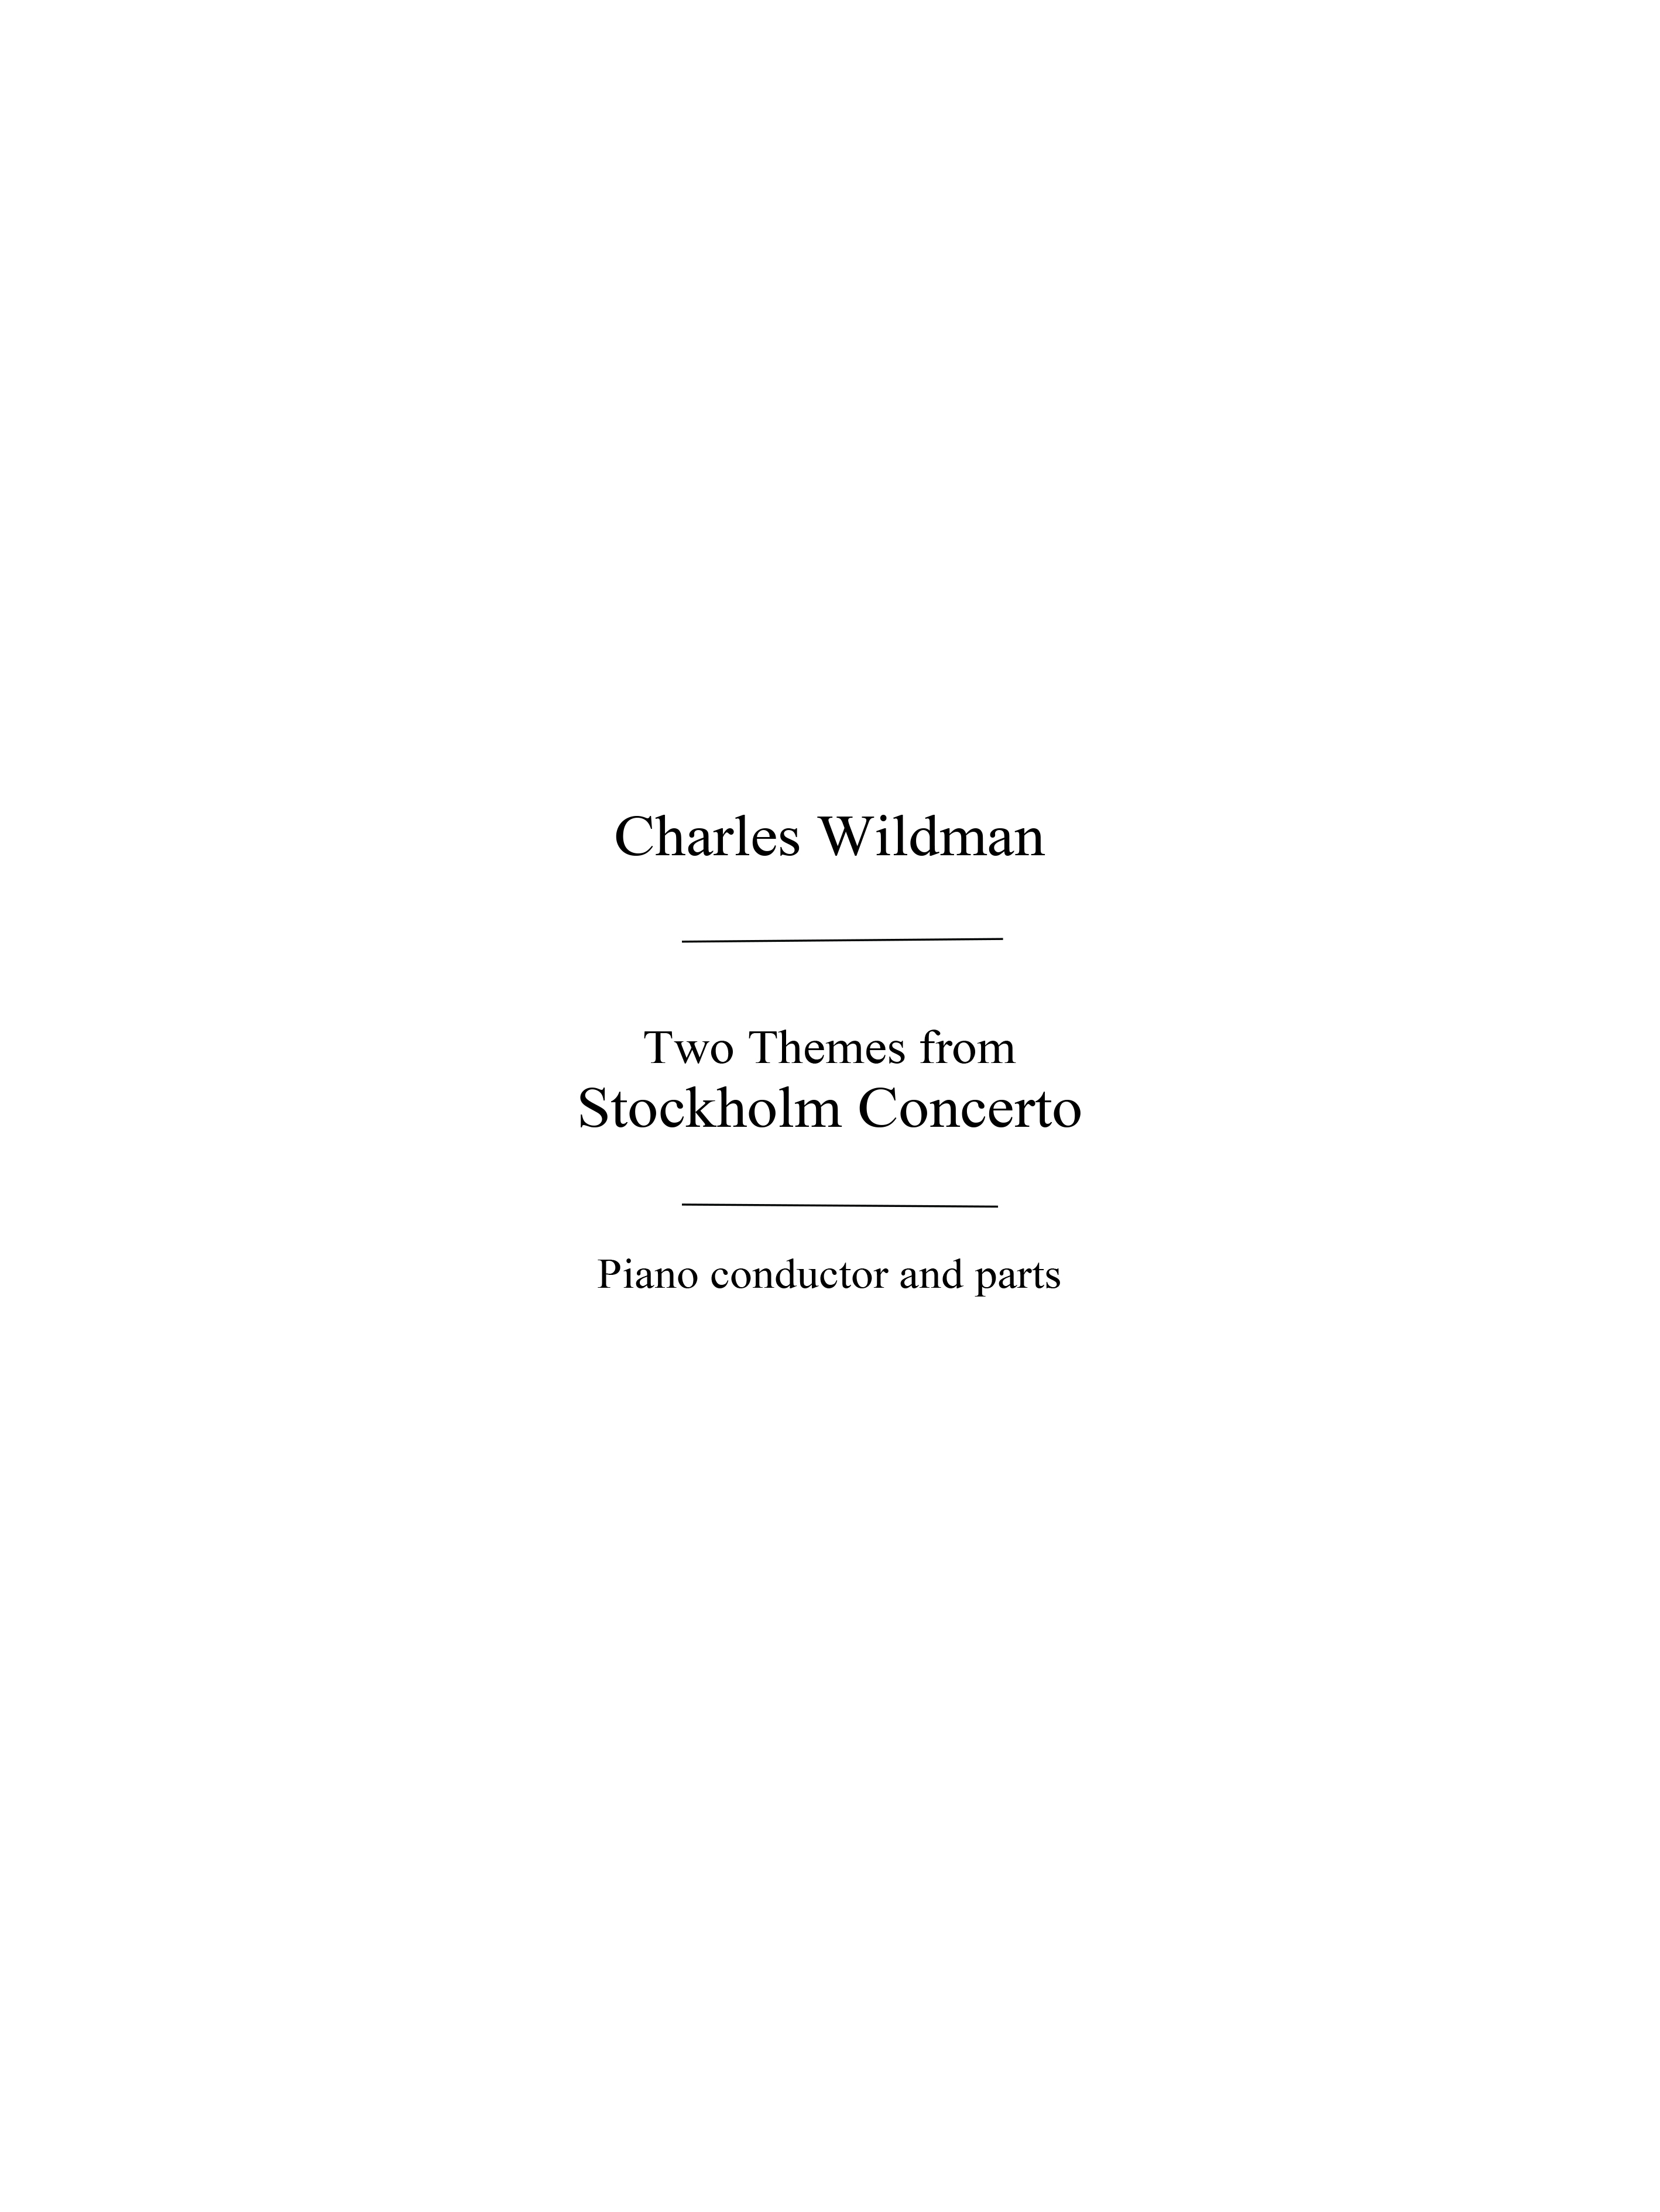 Wildman, C Two Themes From Stockholm Concerto Orch Pf Sc/Pts